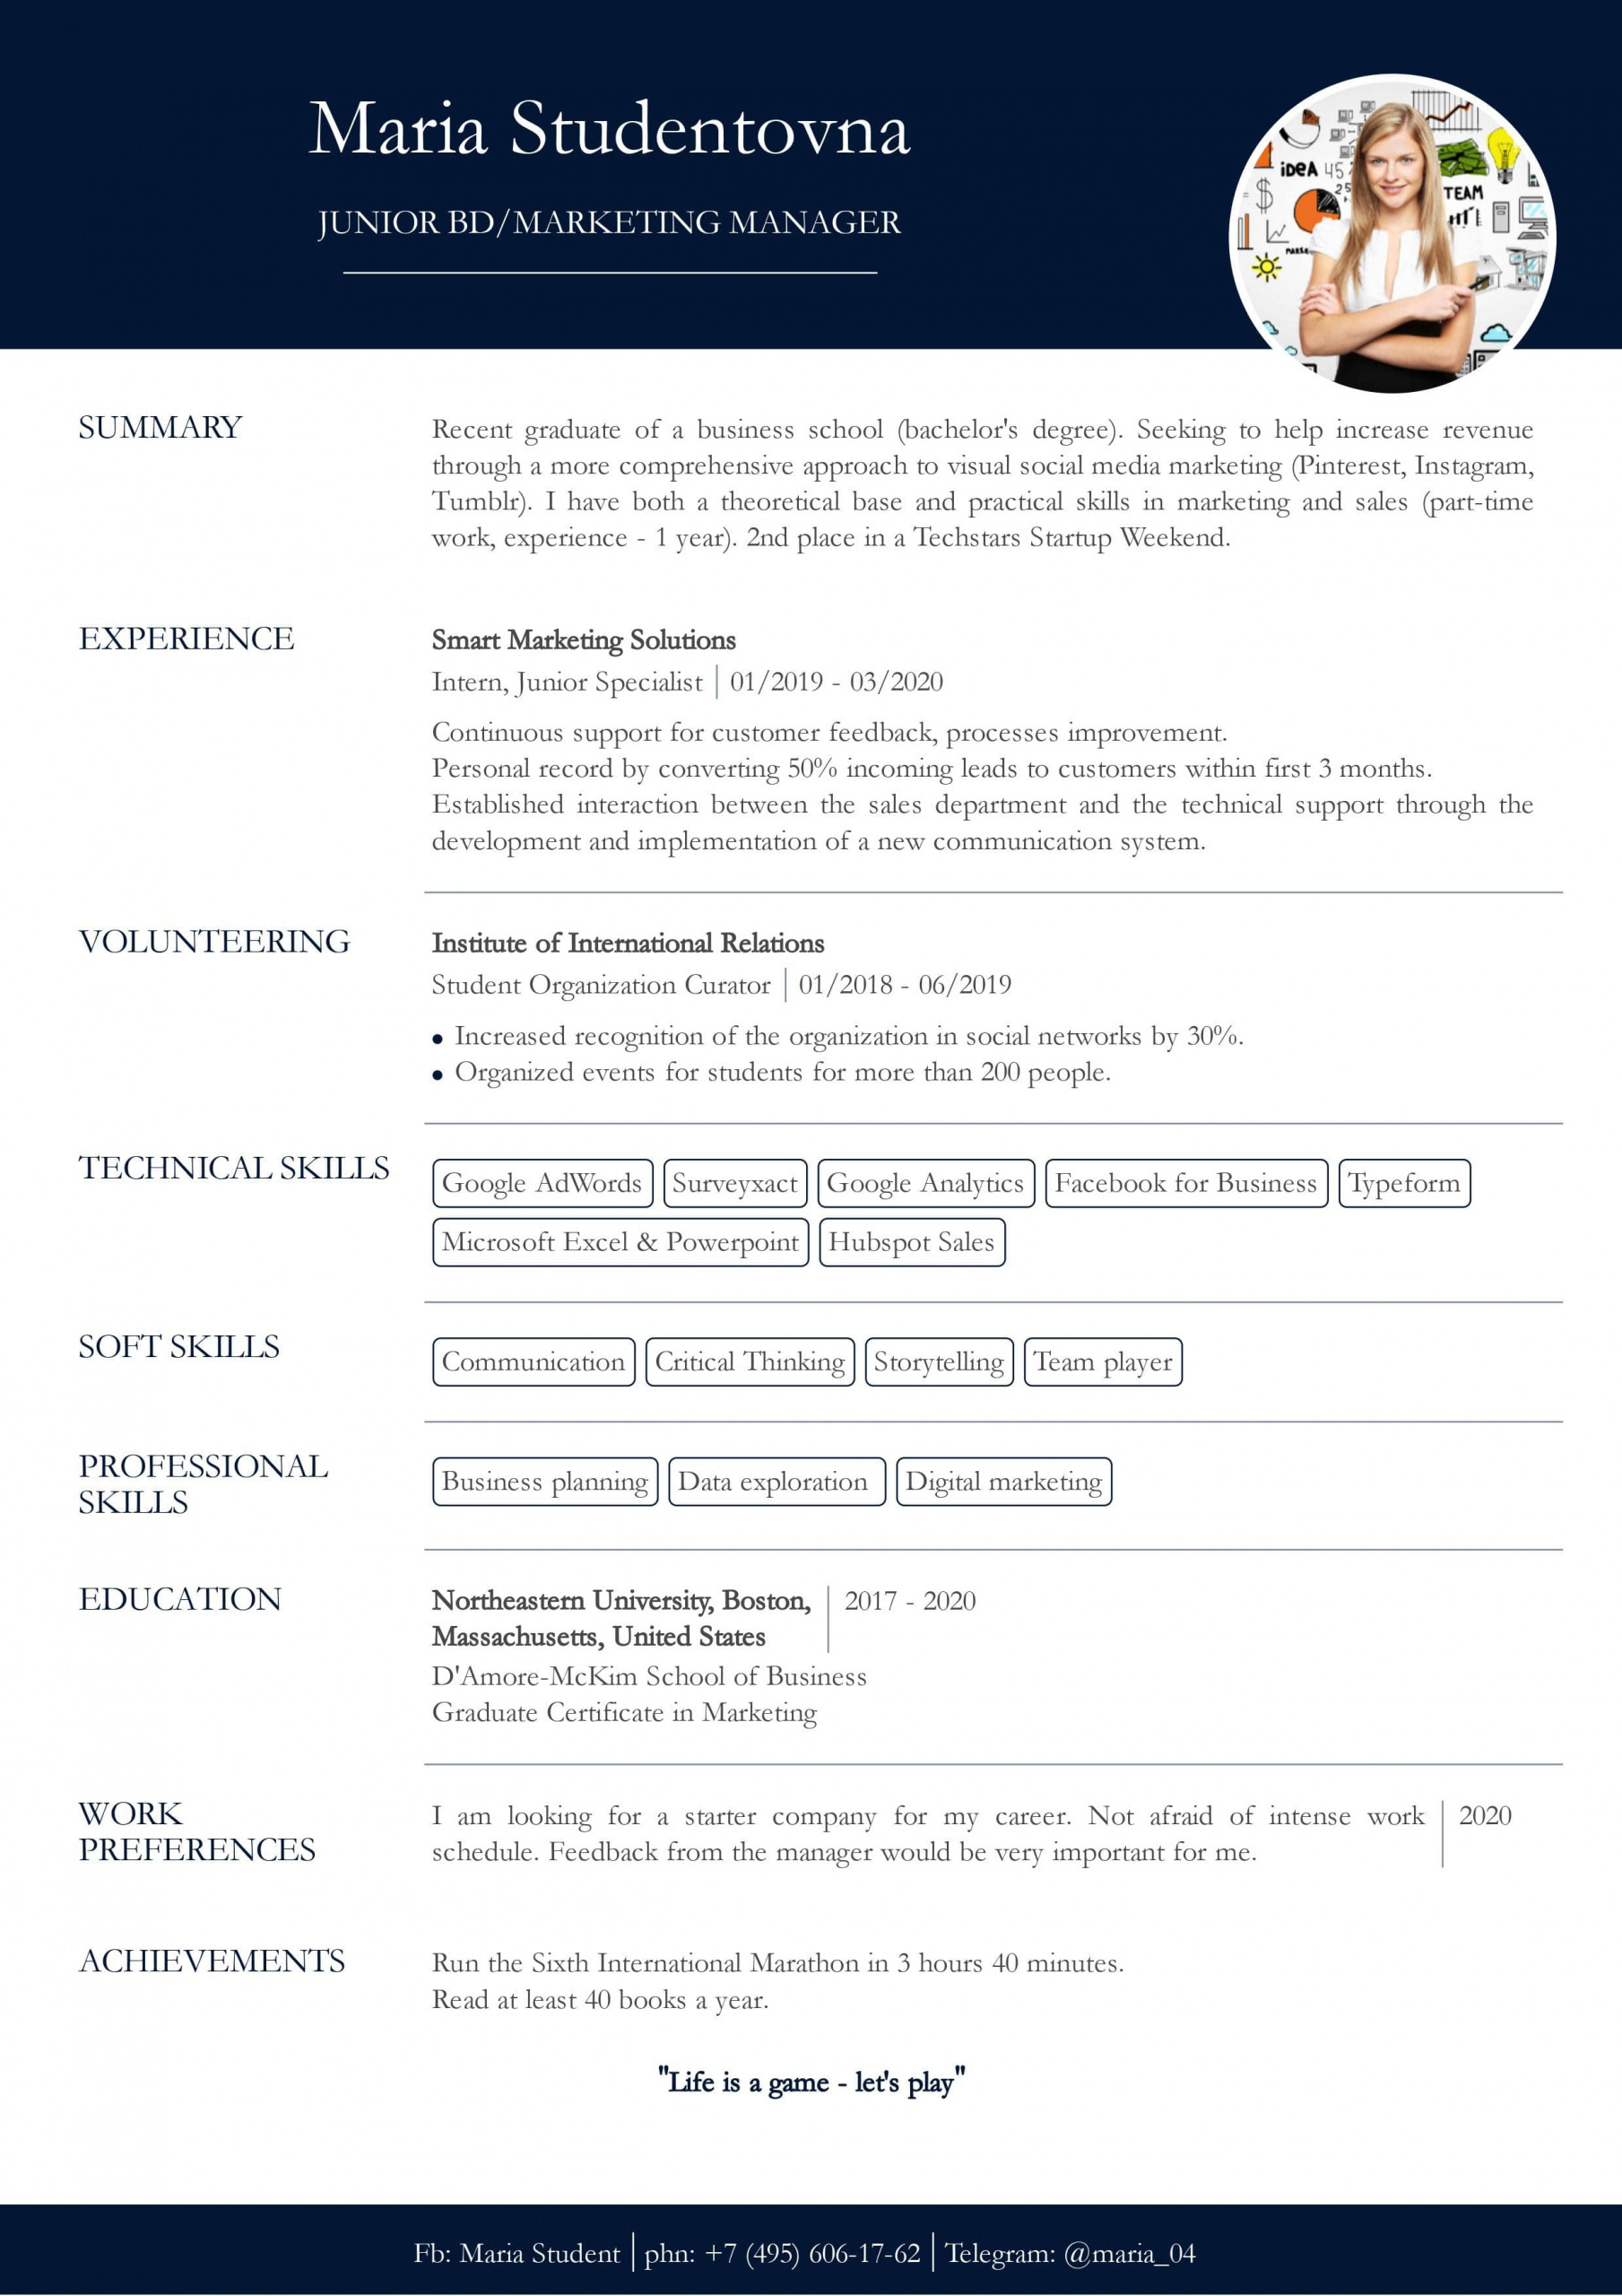 Sample Resume with No High School Diploma Resume with No Work Experience. Sample for Students. – Cv2you Blog